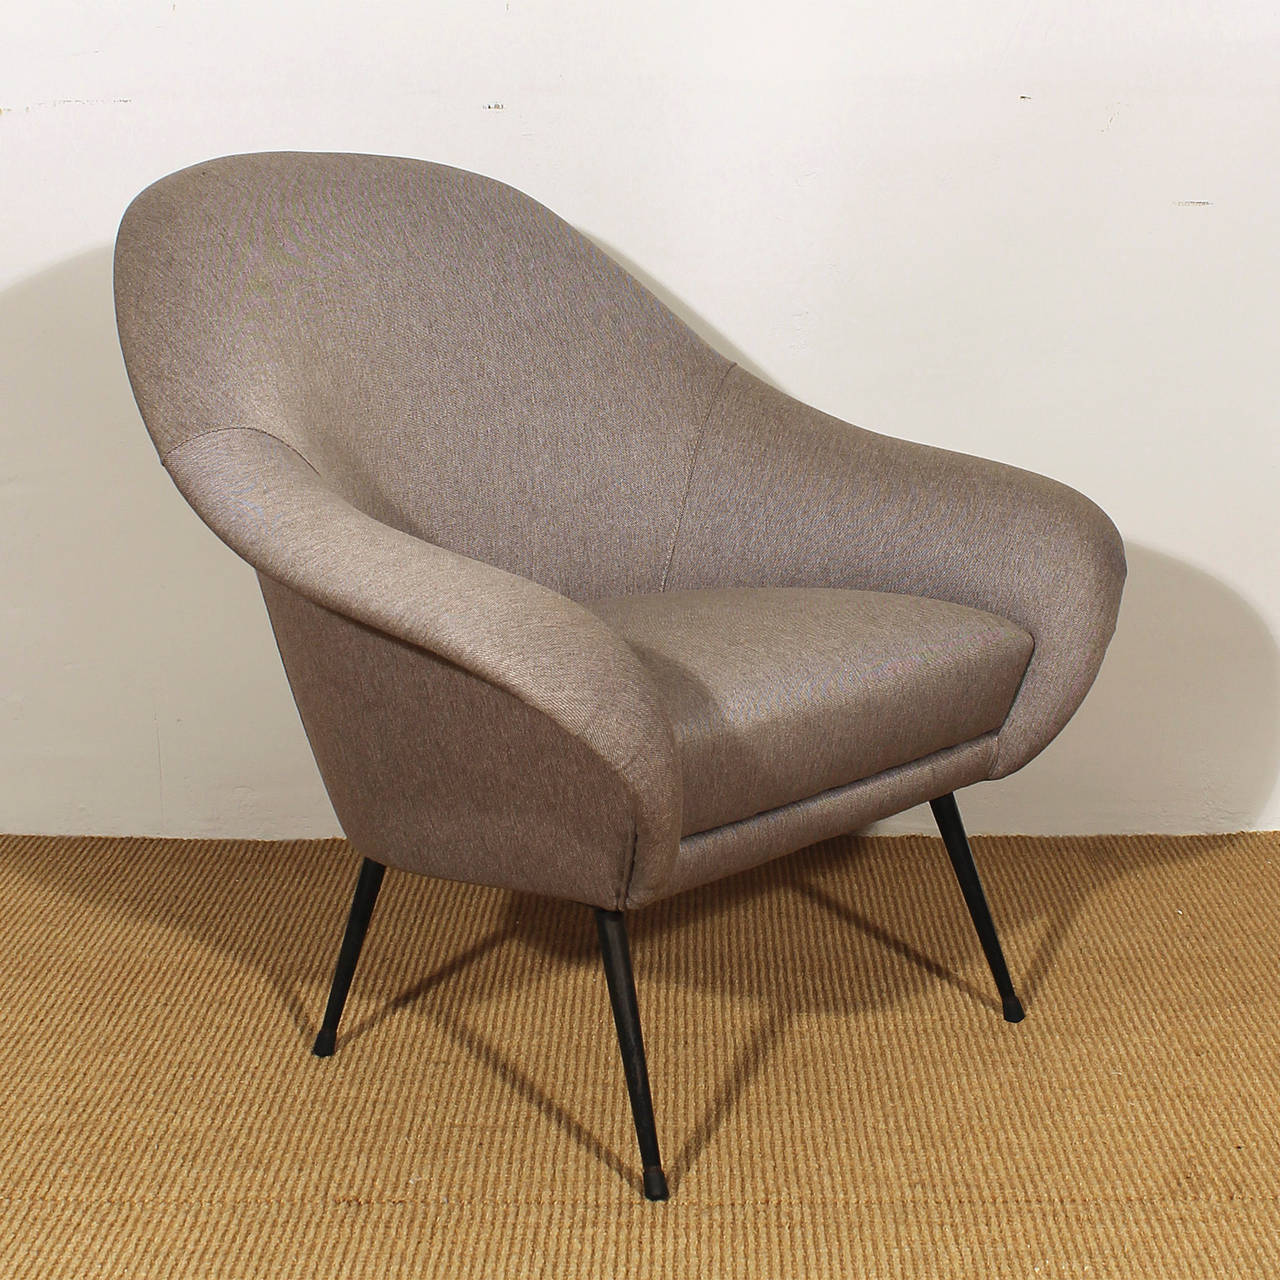 Mid-Century Modern Pair of Small Rounded Armchairs from the 1950s